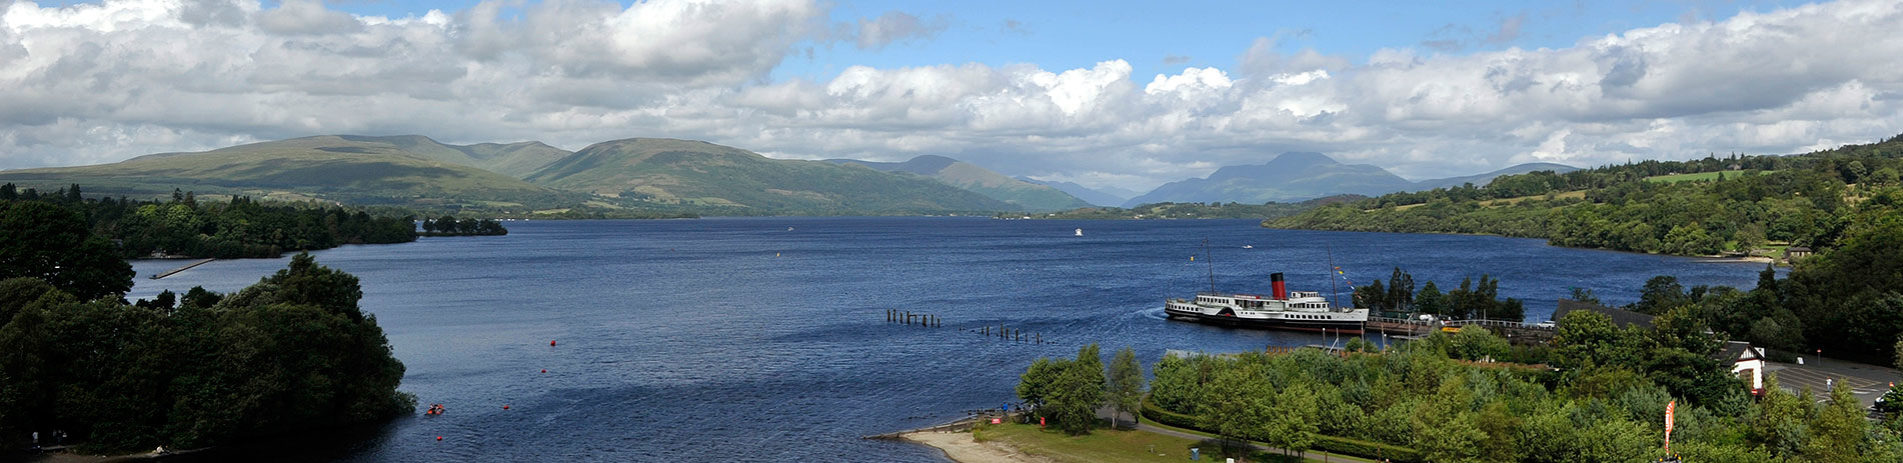 aerial-view-of-loch-lomond-on-sunny-day-with-maid-of-the-loch-steamship-and-ben-lomond-visible-in-the-distance